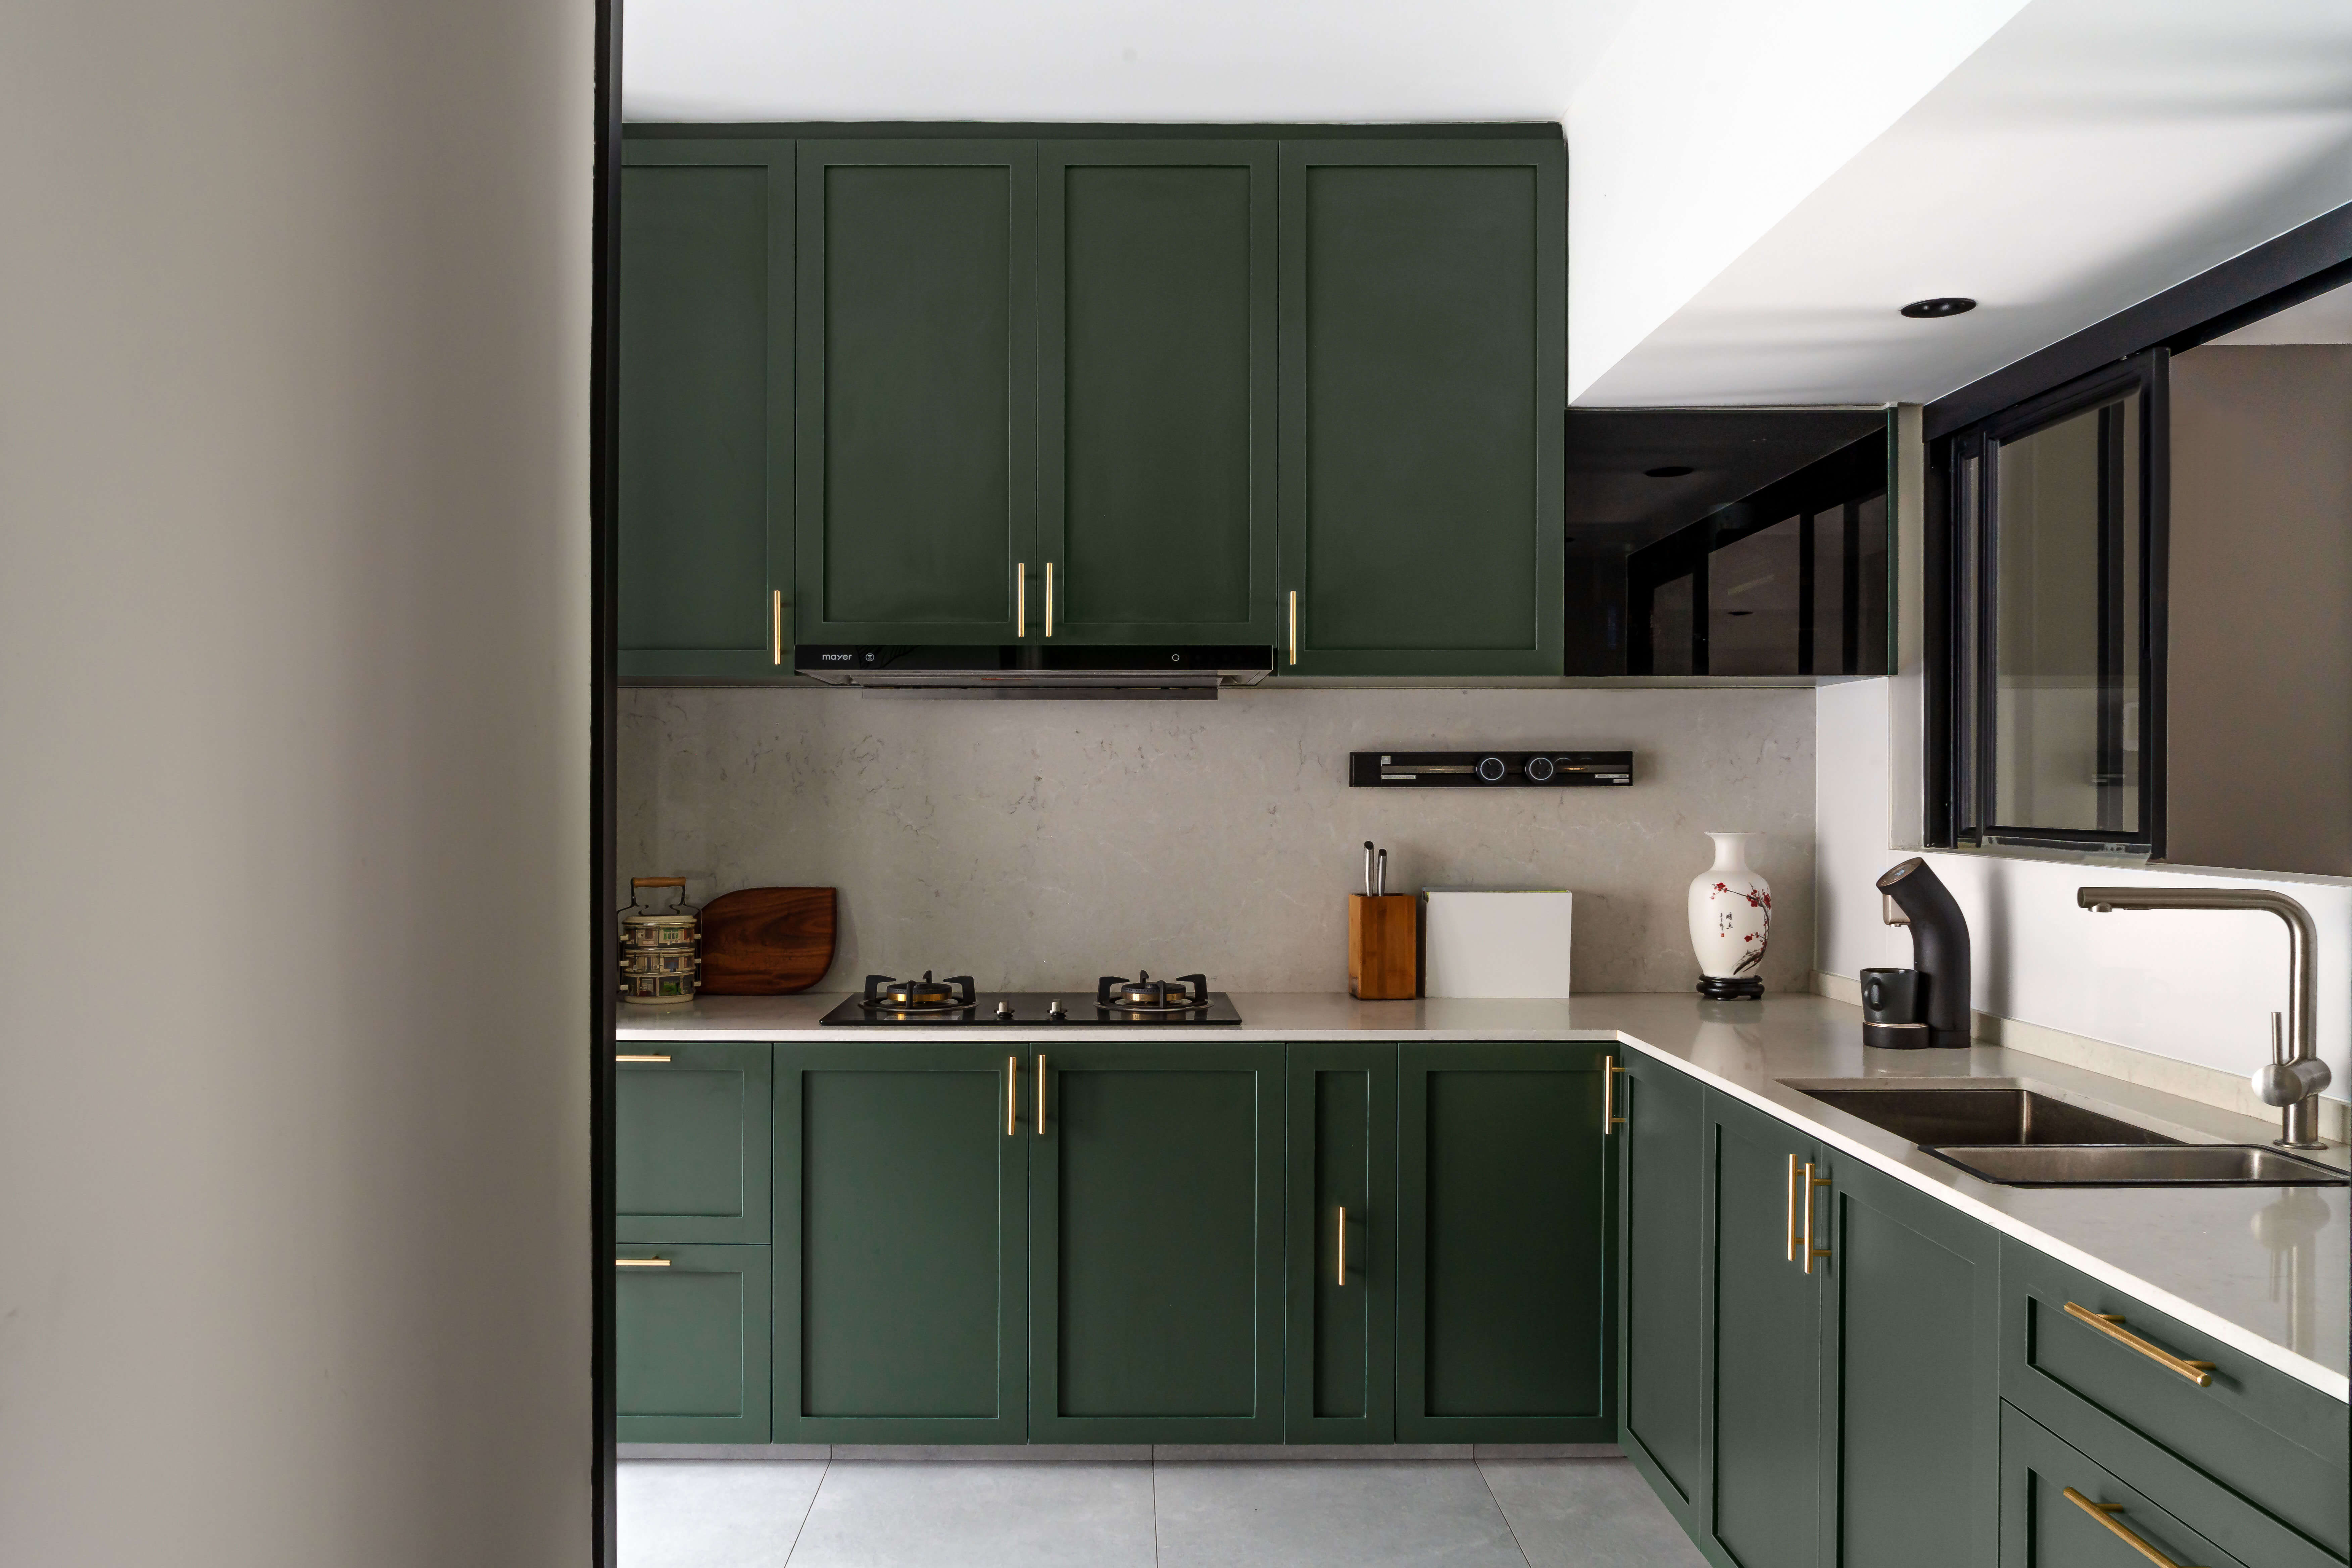 Sophisticated kitchen with dark green cabinets, brass hardware, and marble backsplash, featuring modern appliances and sleek design elements.